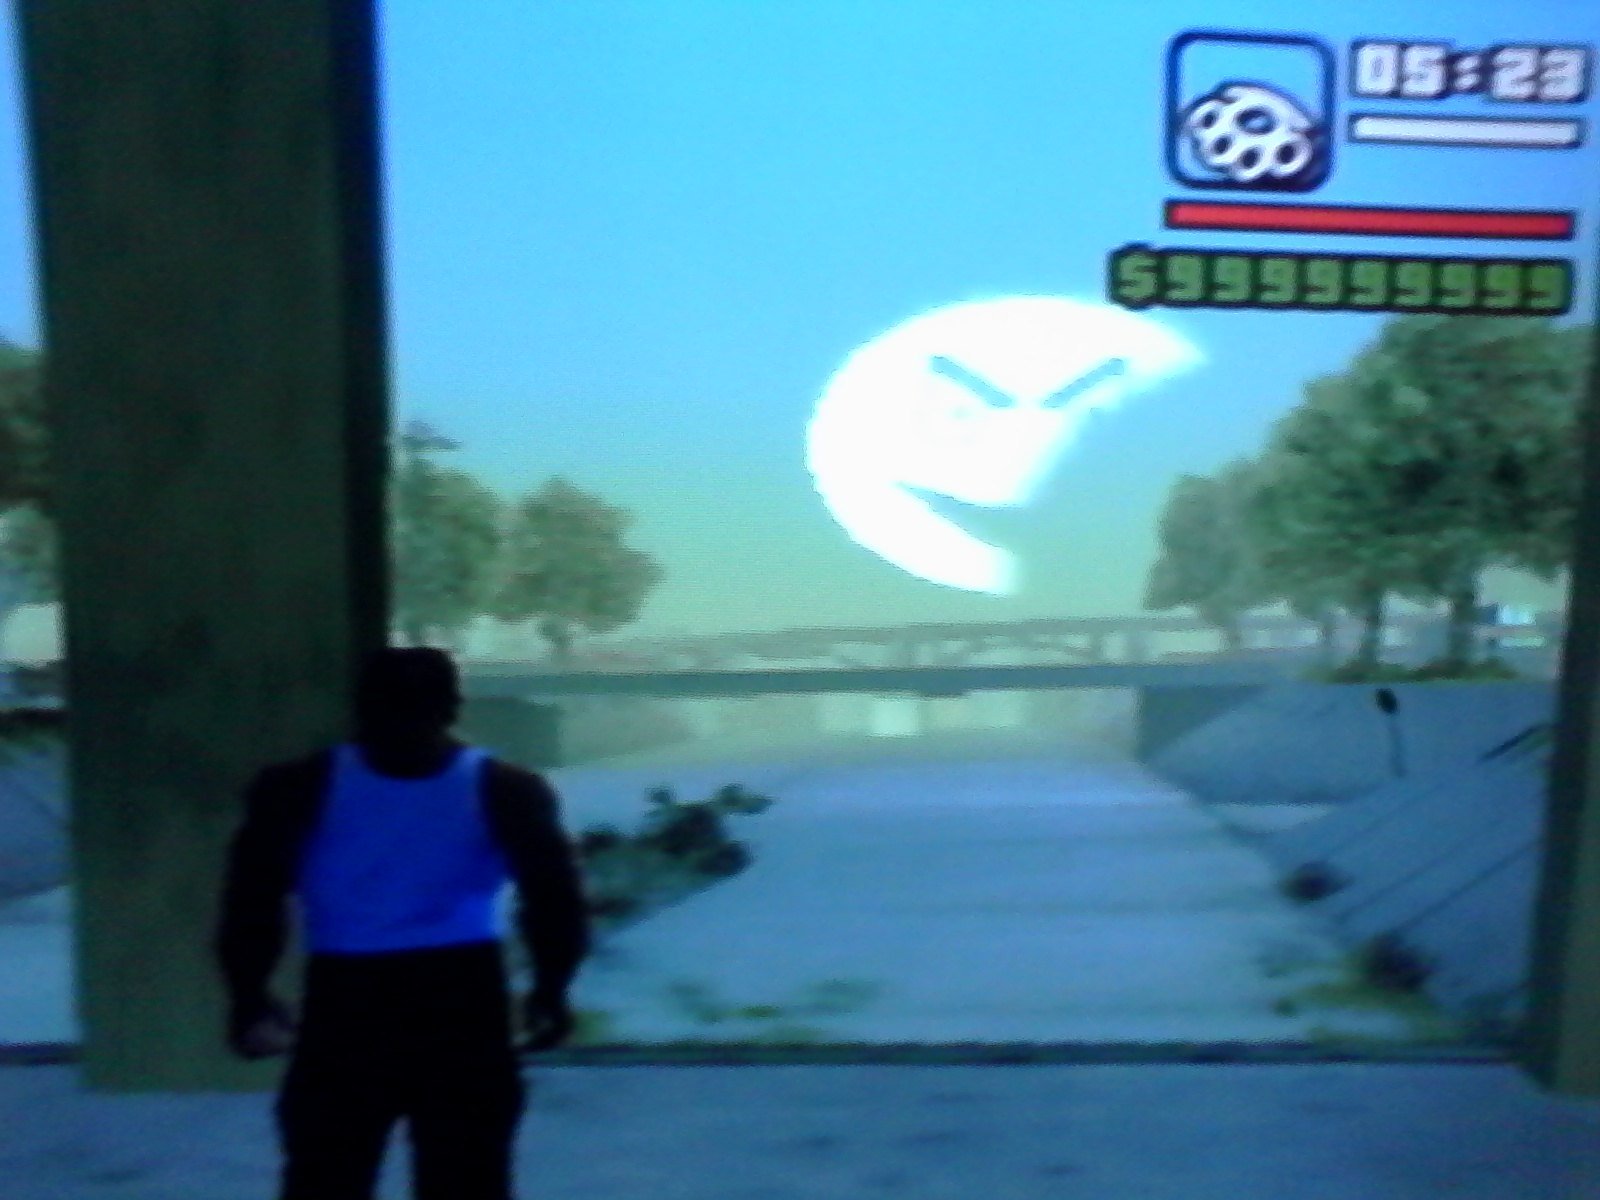 Detailed tutorial) How to mod GTA 3, VC, And SA On Ps2!